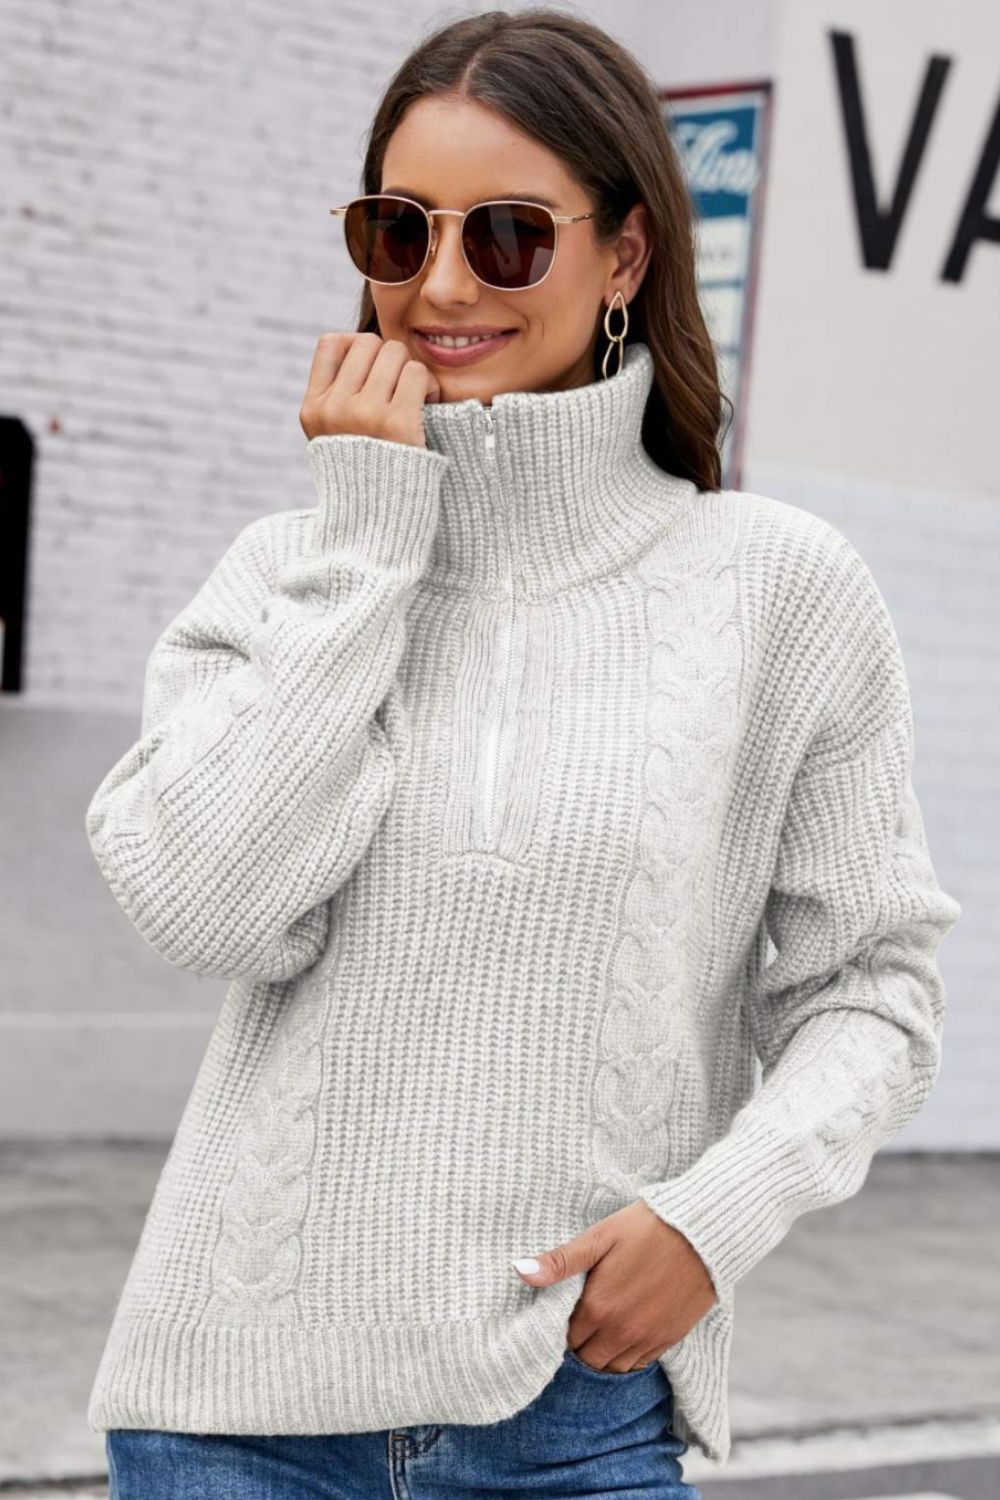 Half Zip Mixed Knit Collared Sweater - Apparel & Accessories Girl Code